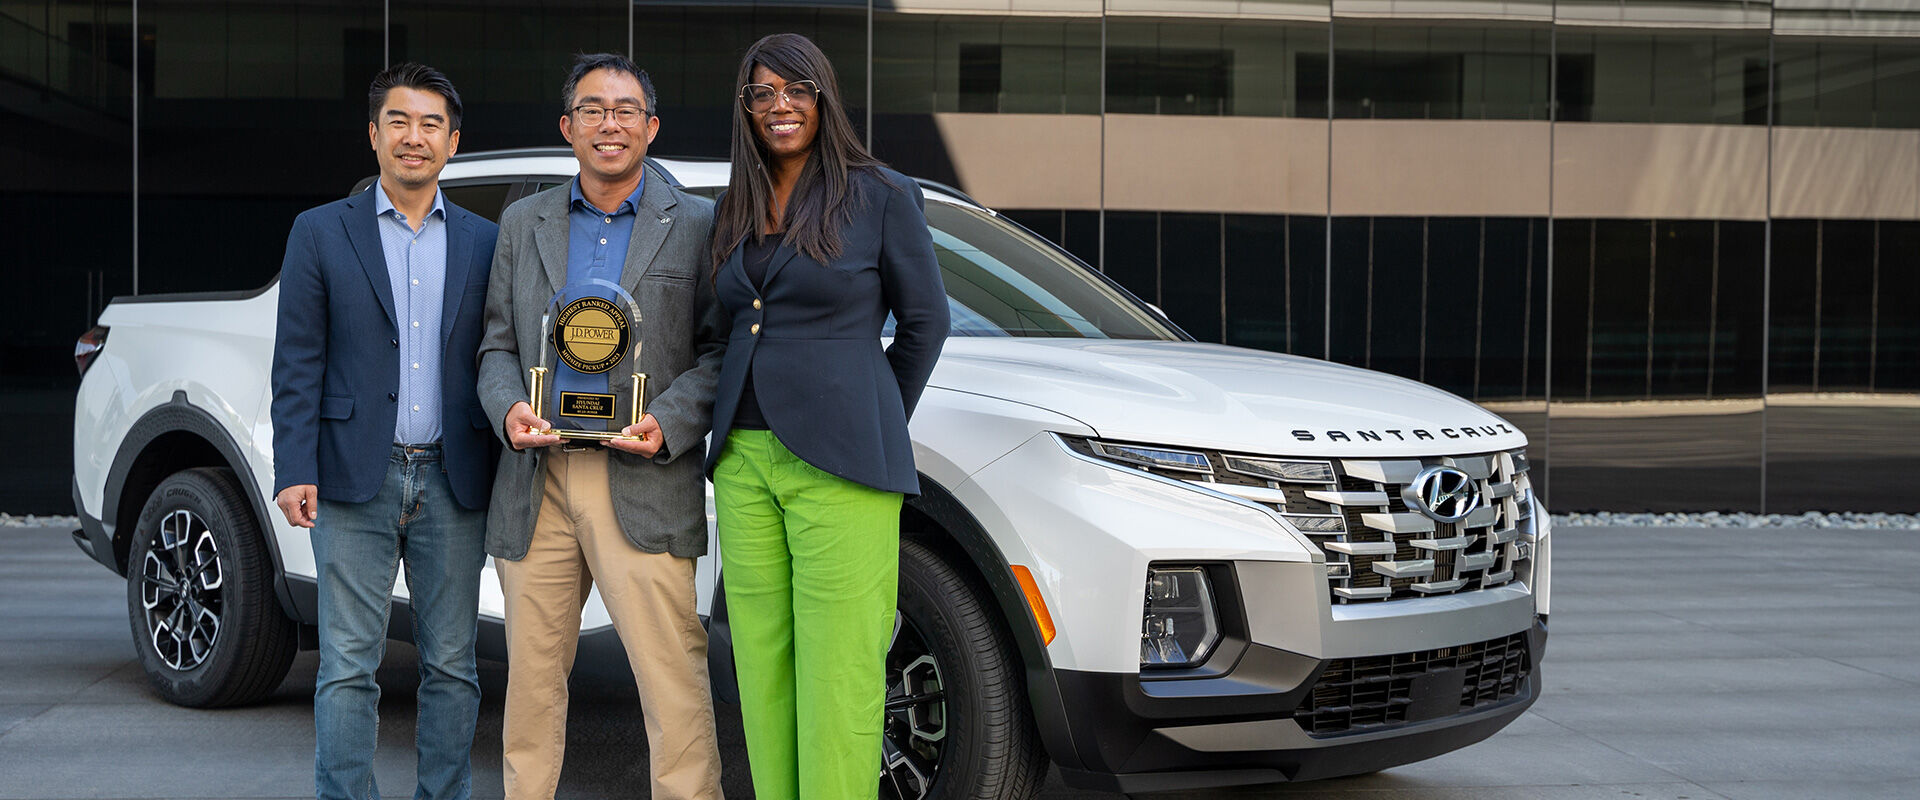 Ricky Lao, director, product planning and mobility strategy, Hyundai Motor North America; Trevor Lai, senior manager, product planning, Hyundai Motor North America; and Olabisi Boyle, vice president, product planning and mobility strategy, Hyundai Motor North America accept the J.D. Power APEAL trophy for the Hyundai Santa Cruz in Fountain Valley, Calif., July 20, 2023. 